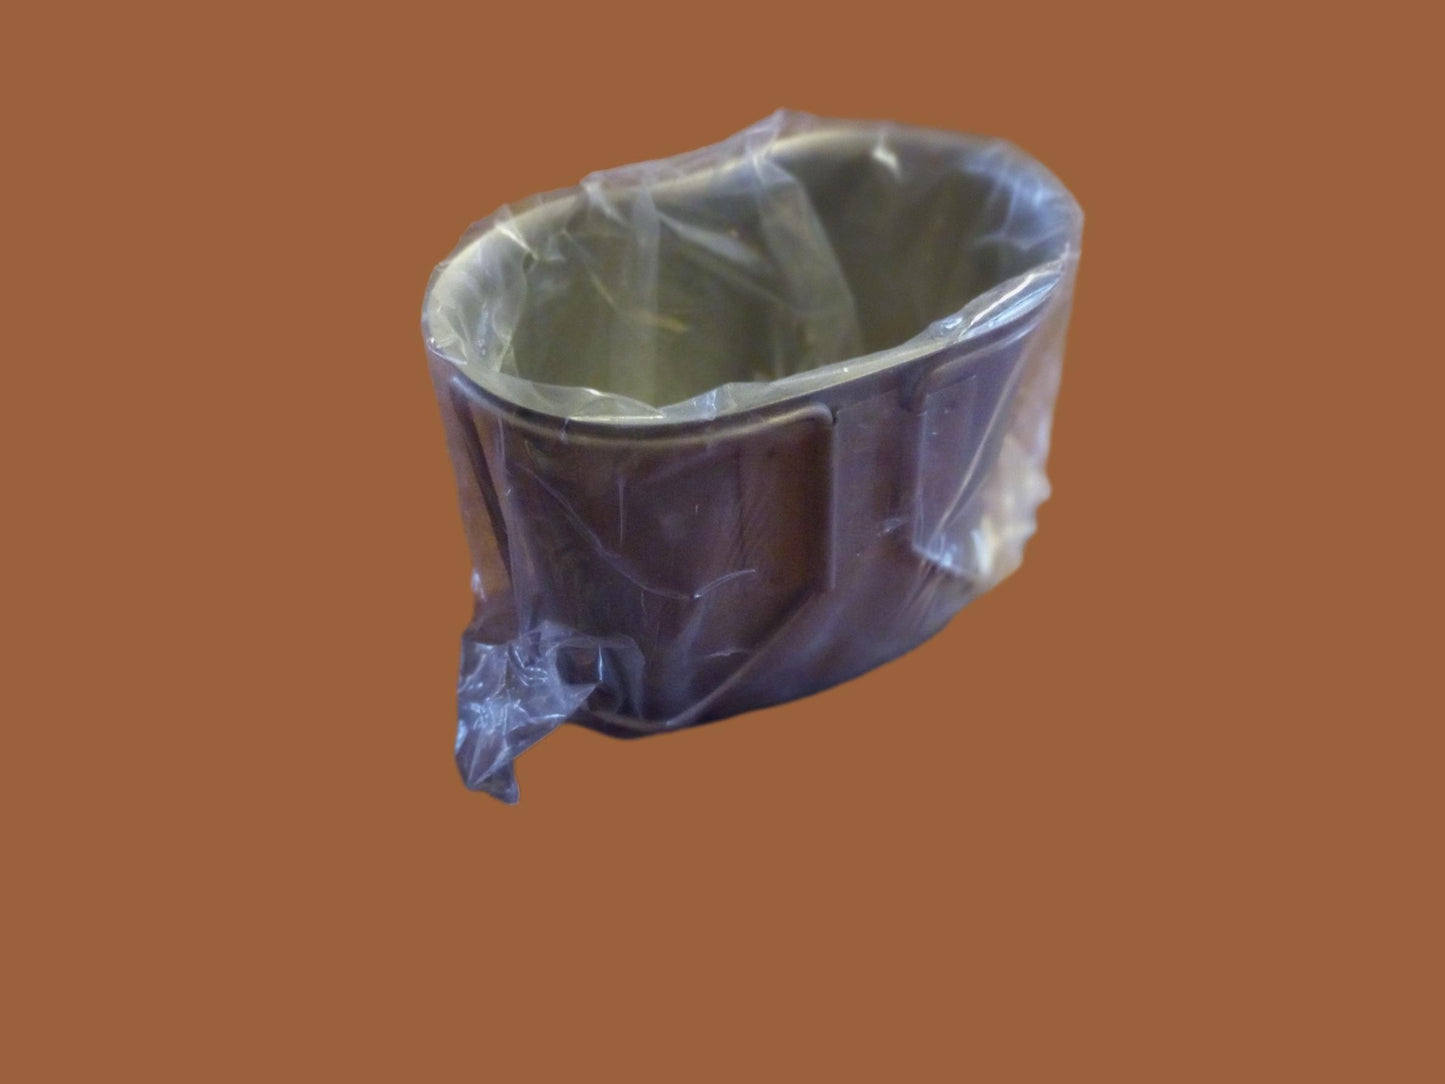 MILITARY ISSUE CANTEEN CUP GENUINE SURPLUS 1QT USGI HEAVY DUTY NEW IN BAGS